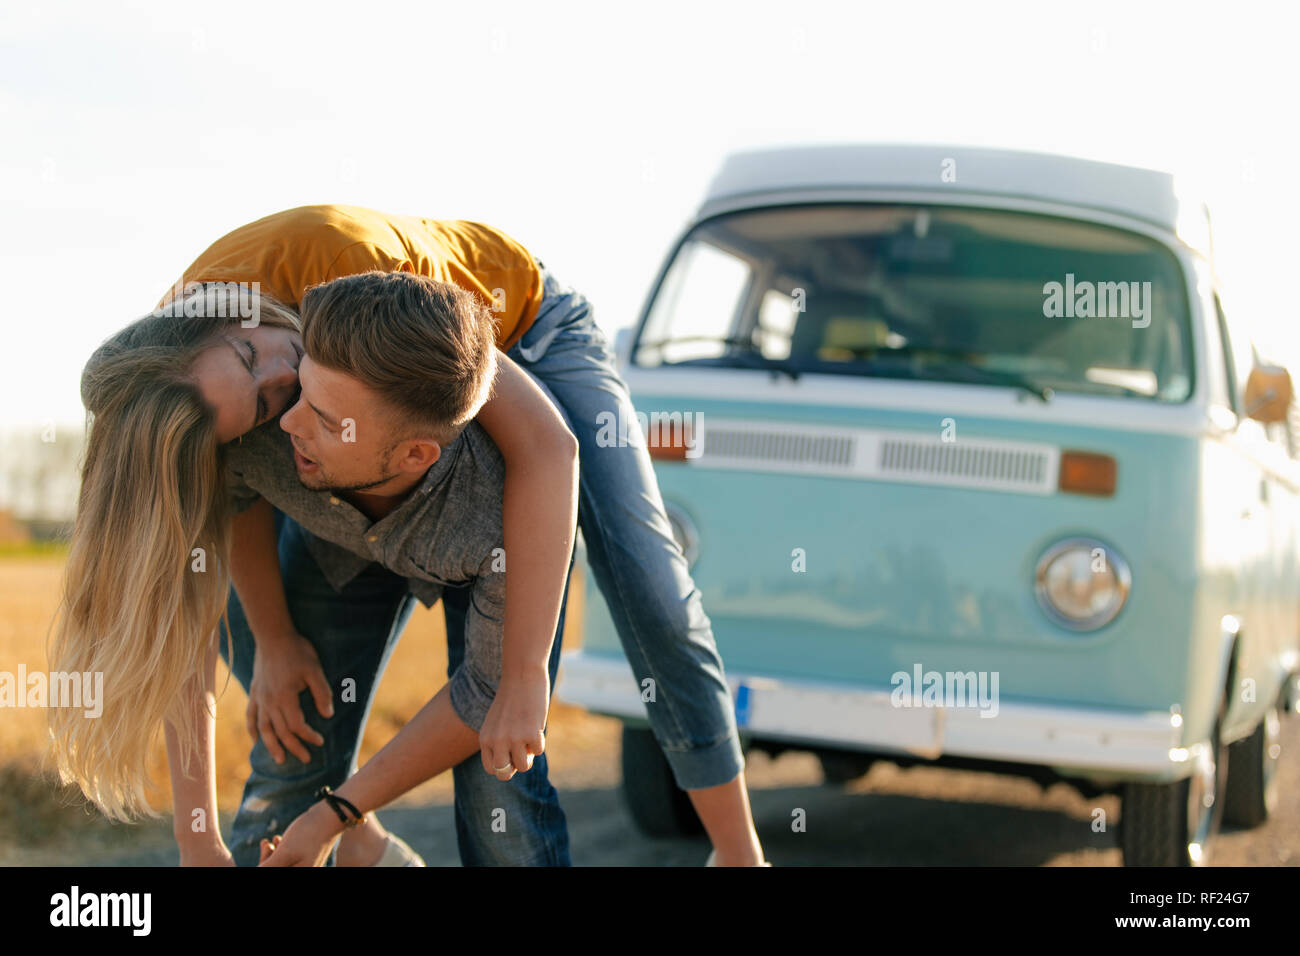 Playful young couple at camper van in rural landscape Stock Photo